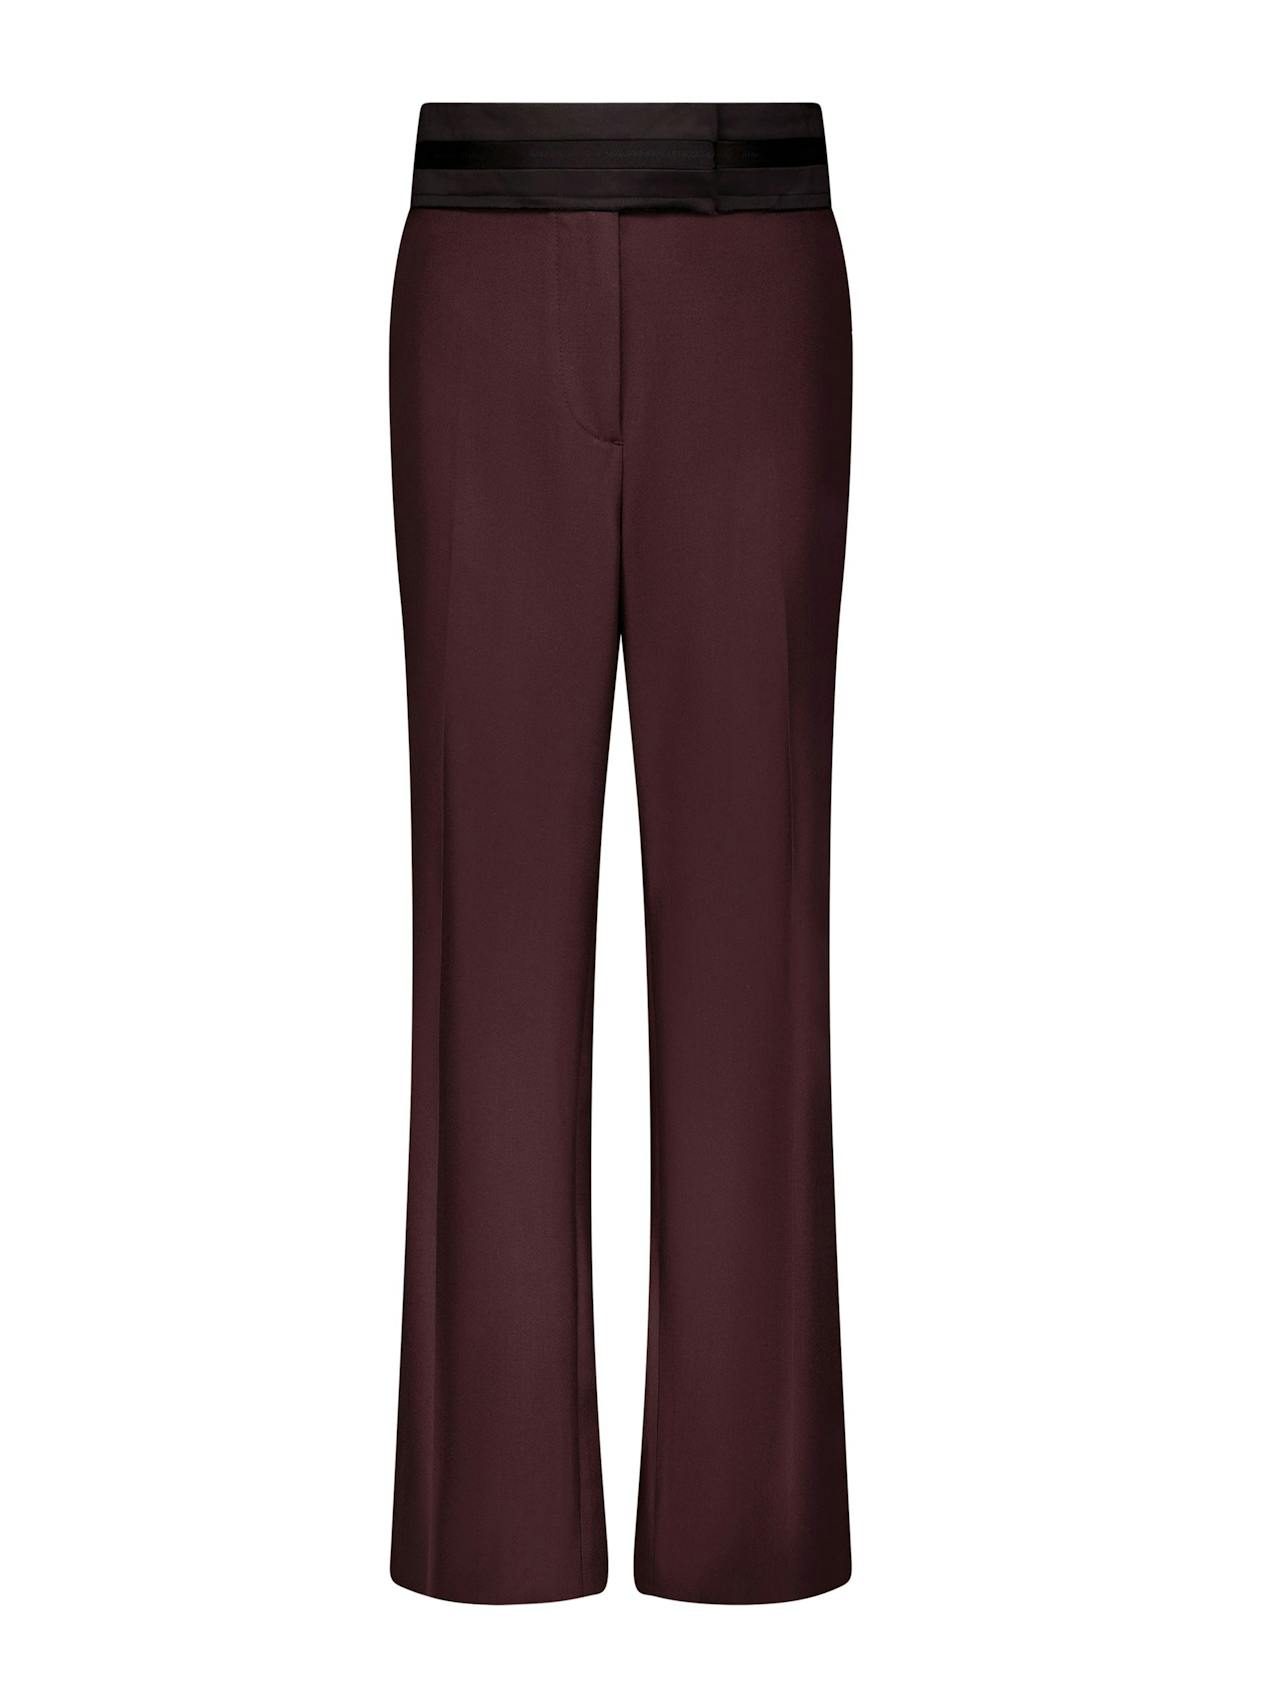 Bordeaux relaxed trouser, with raw edge detail